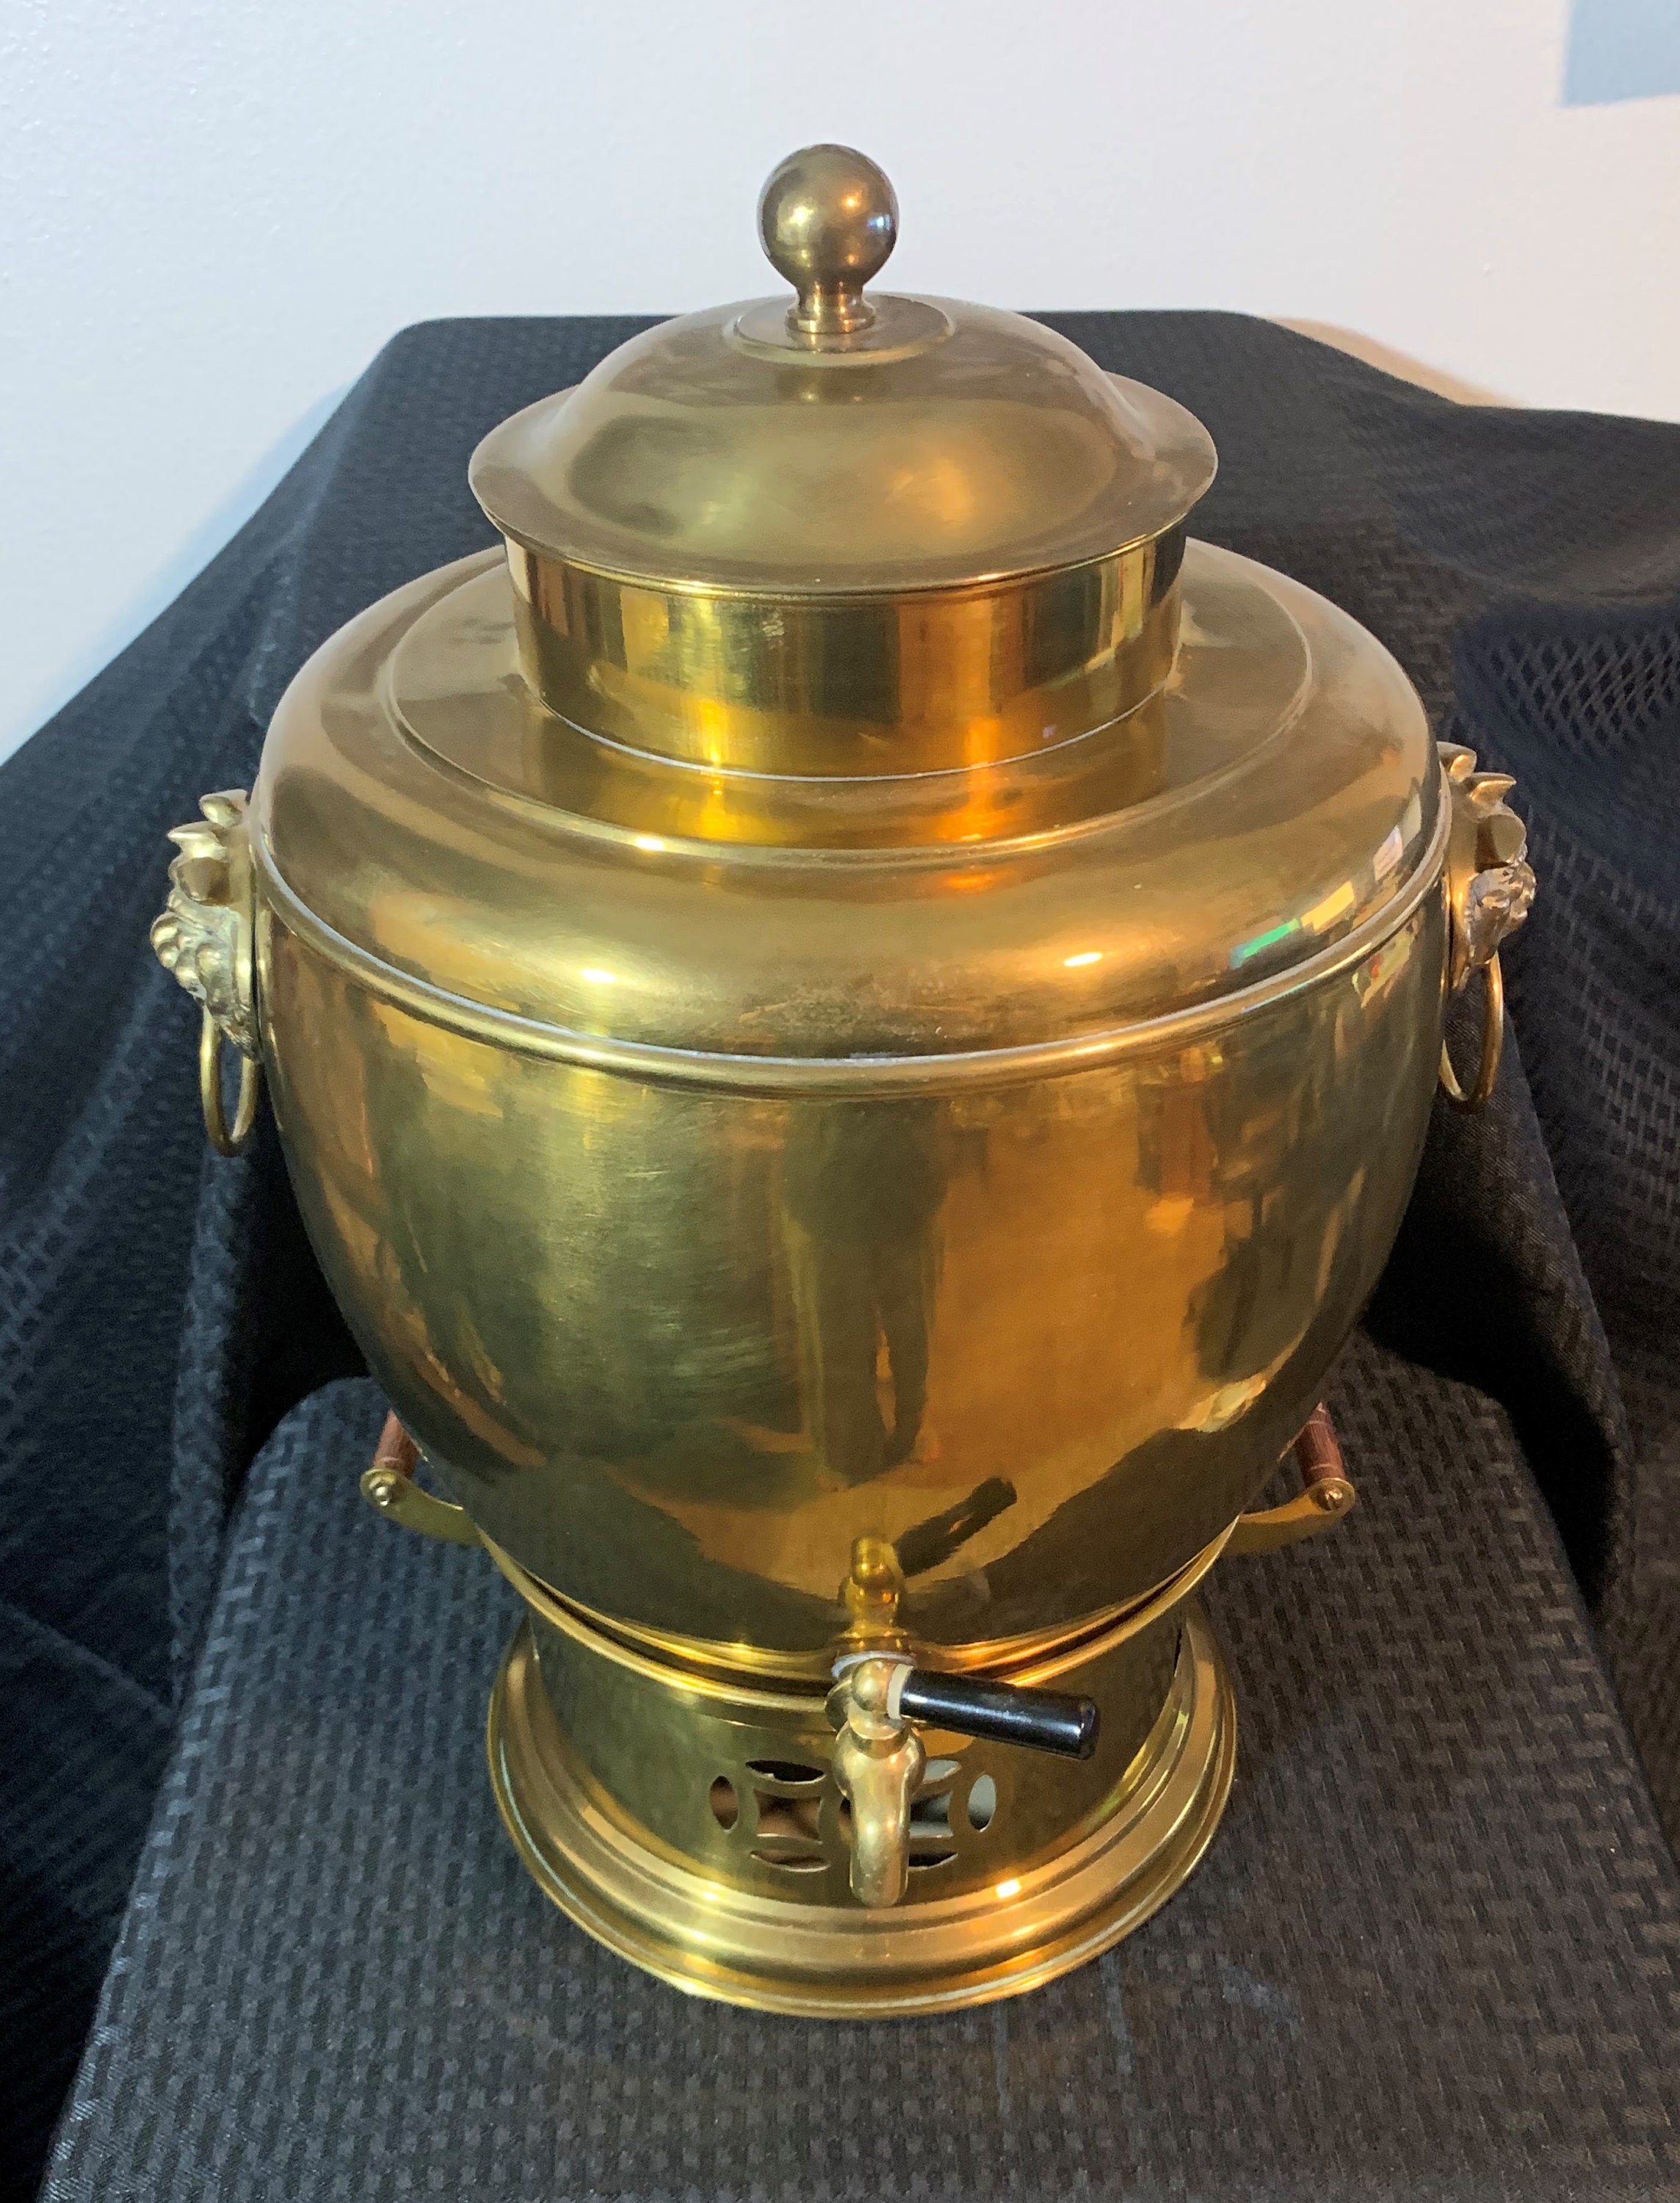 Hot Water Urn – Secondhand Israel